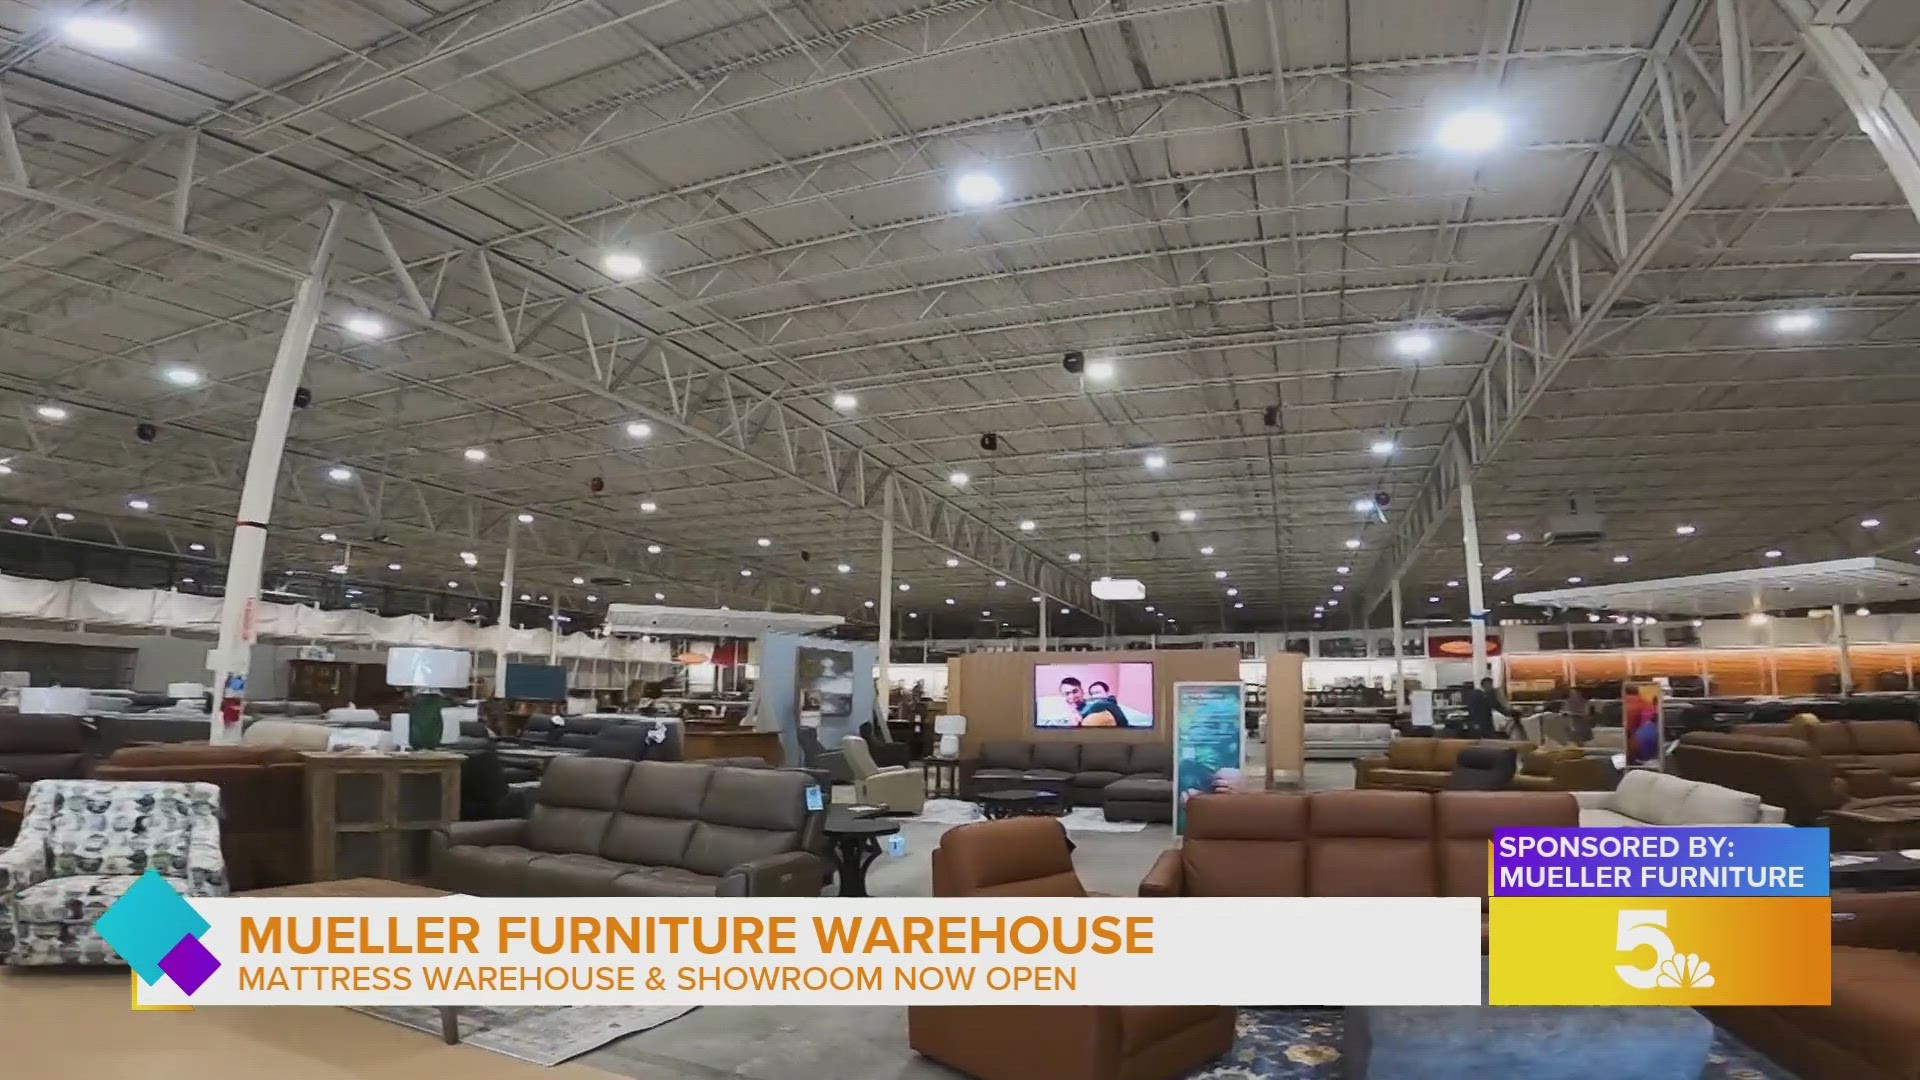 The new store, which is located at the former Weekends Only building in Fairview Heights, is 90,000-square-foot and includes a 55,000-square-foot showroom.